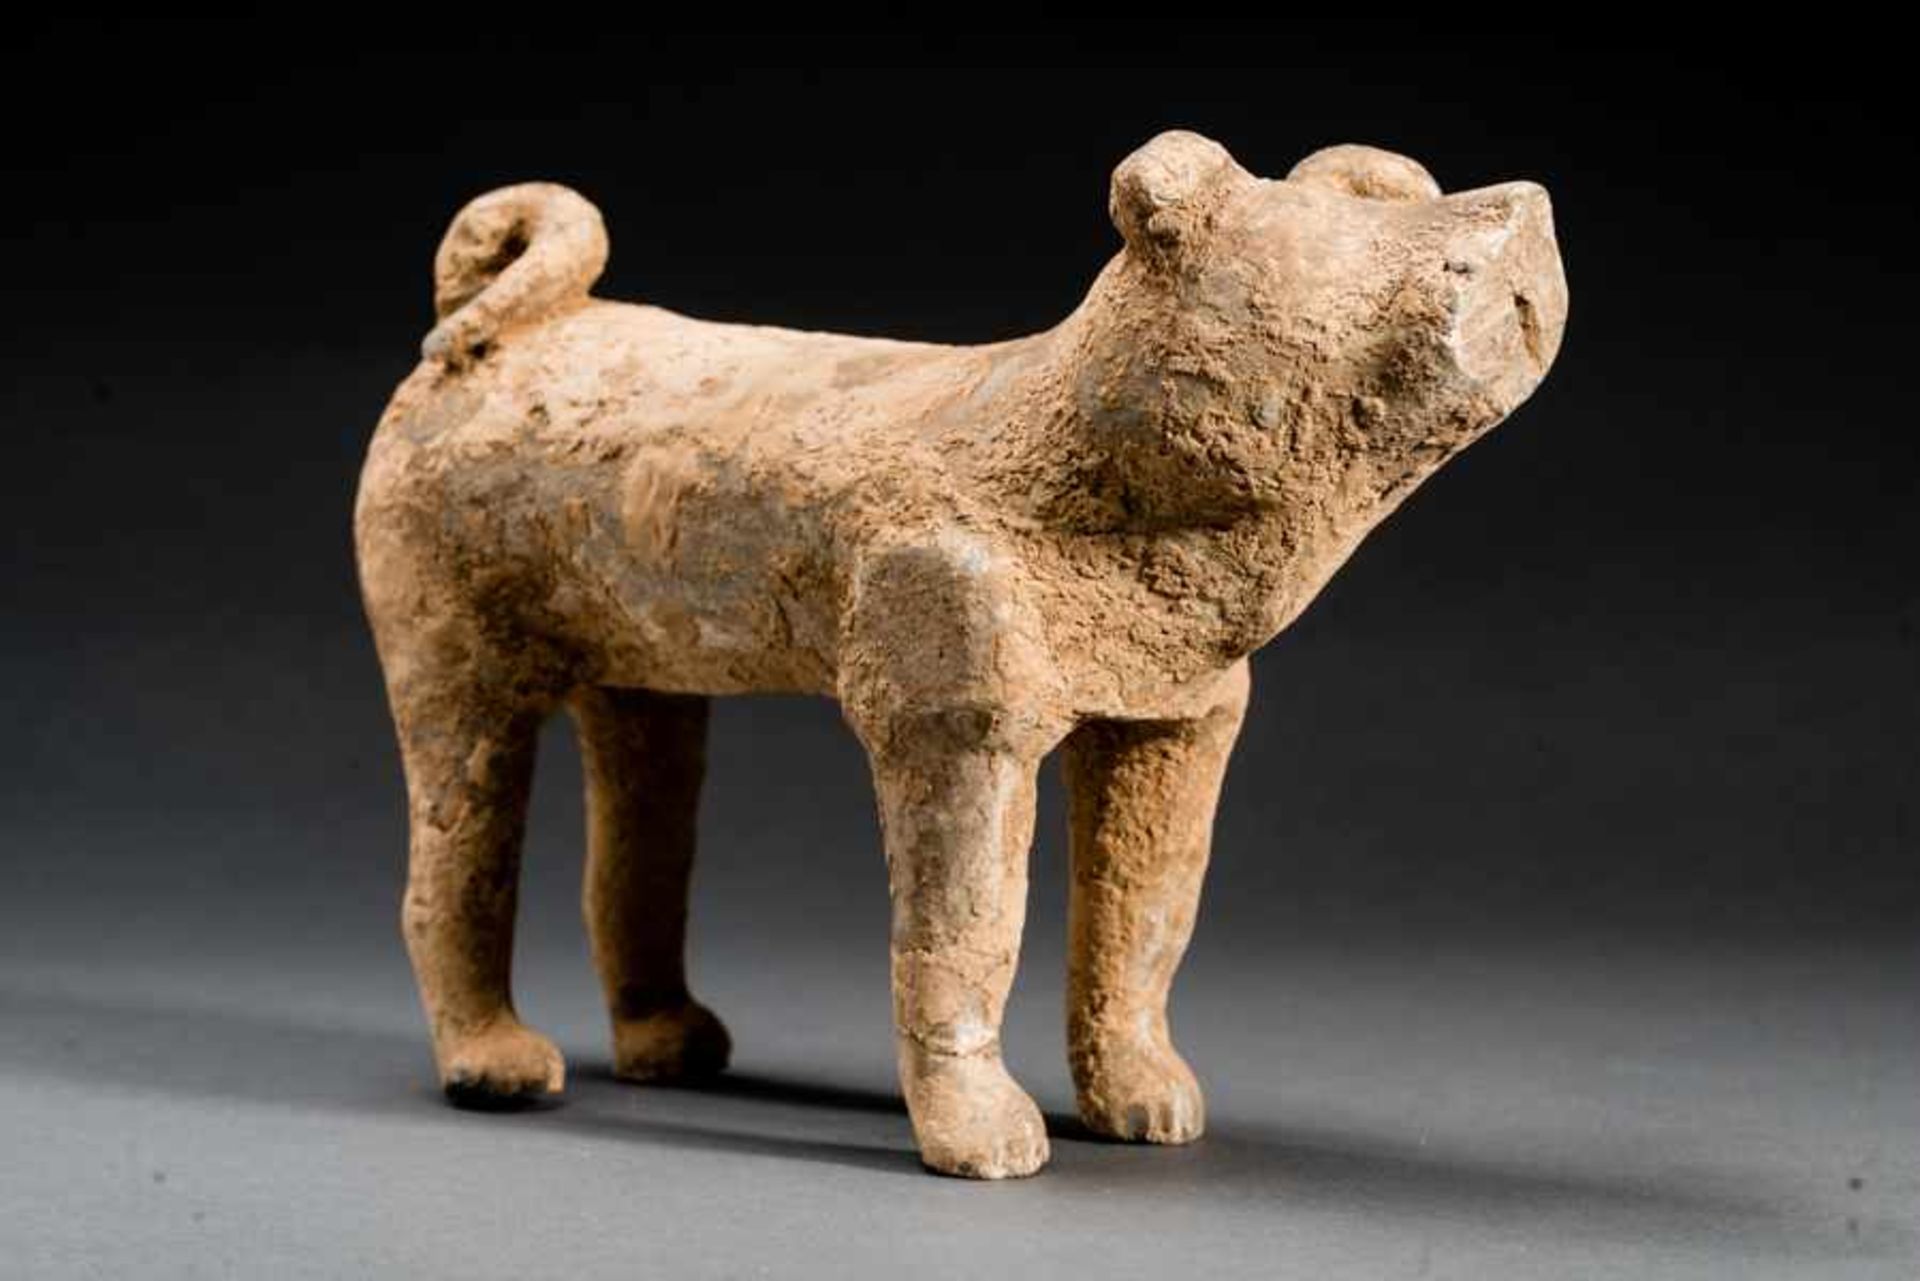 DOG Terracotta. China, Han dynasty(206 BCE - 220 CE)陶狗A dog like many in this world, alert and